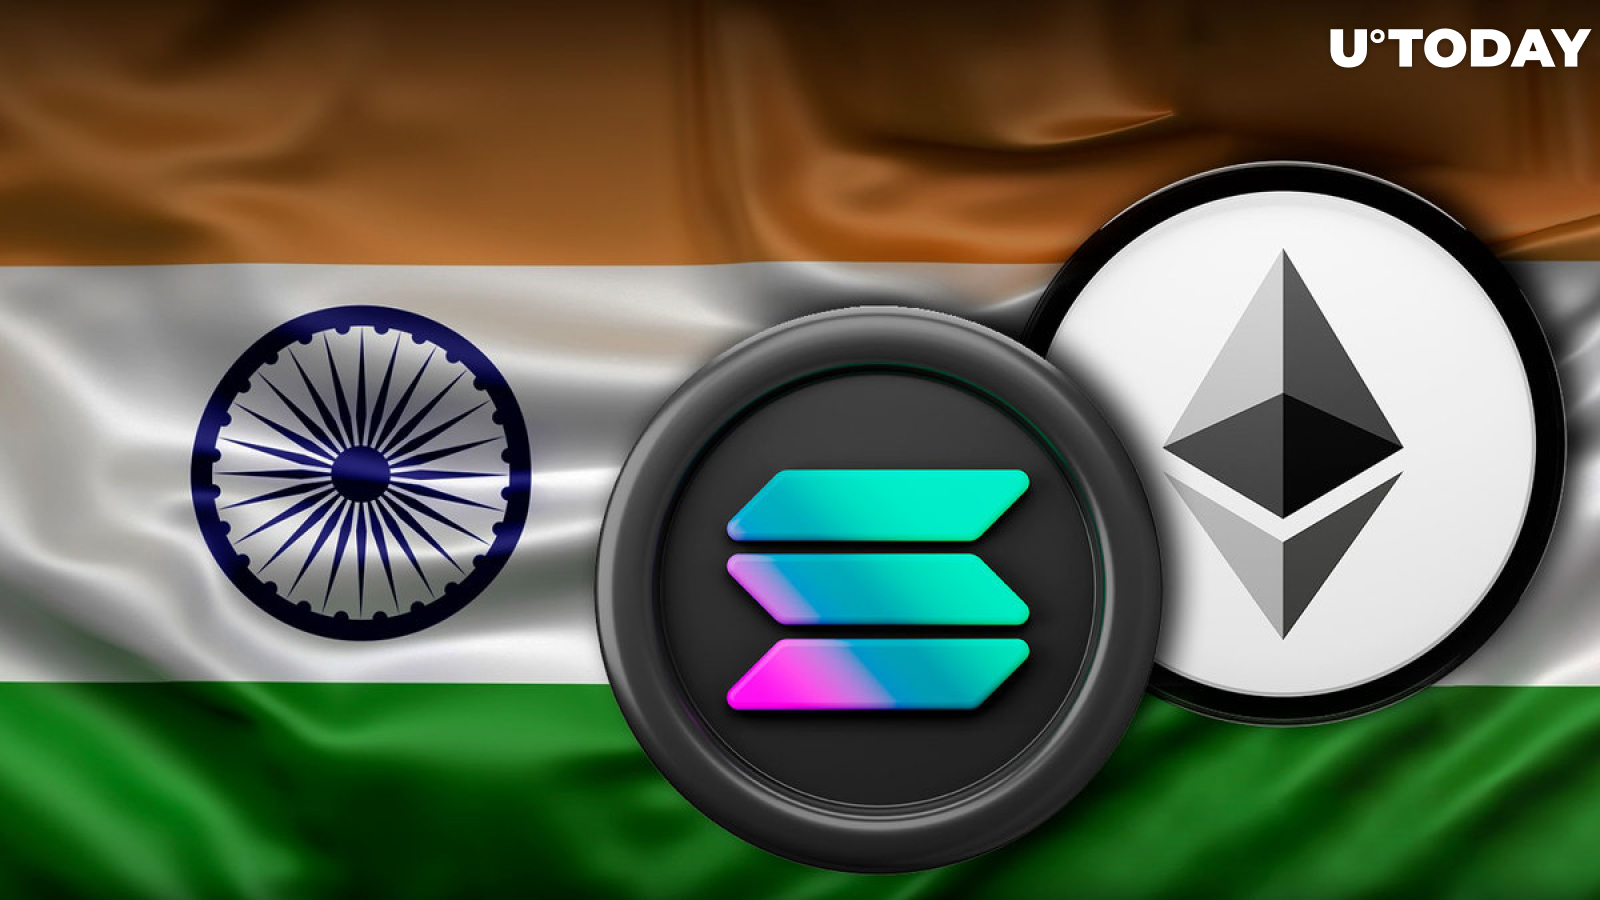 Solana (SOL) Reaches Ethereum's Level of Popularity in India, Says Analyst